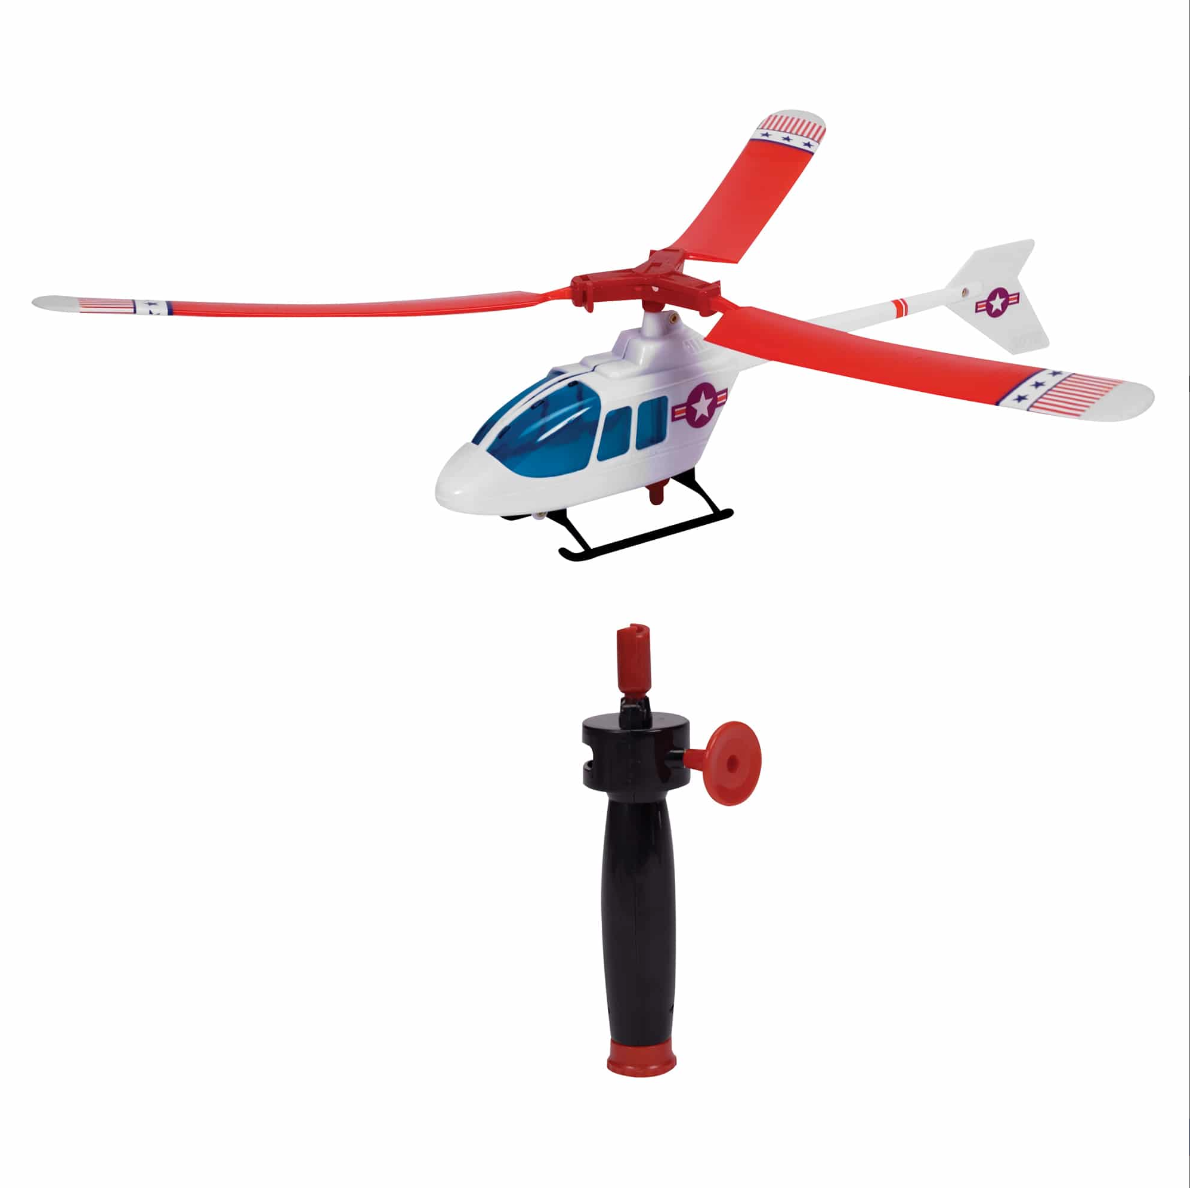 Picture of Zoom Copter out of packaging. Helicopter and launching handle shown.